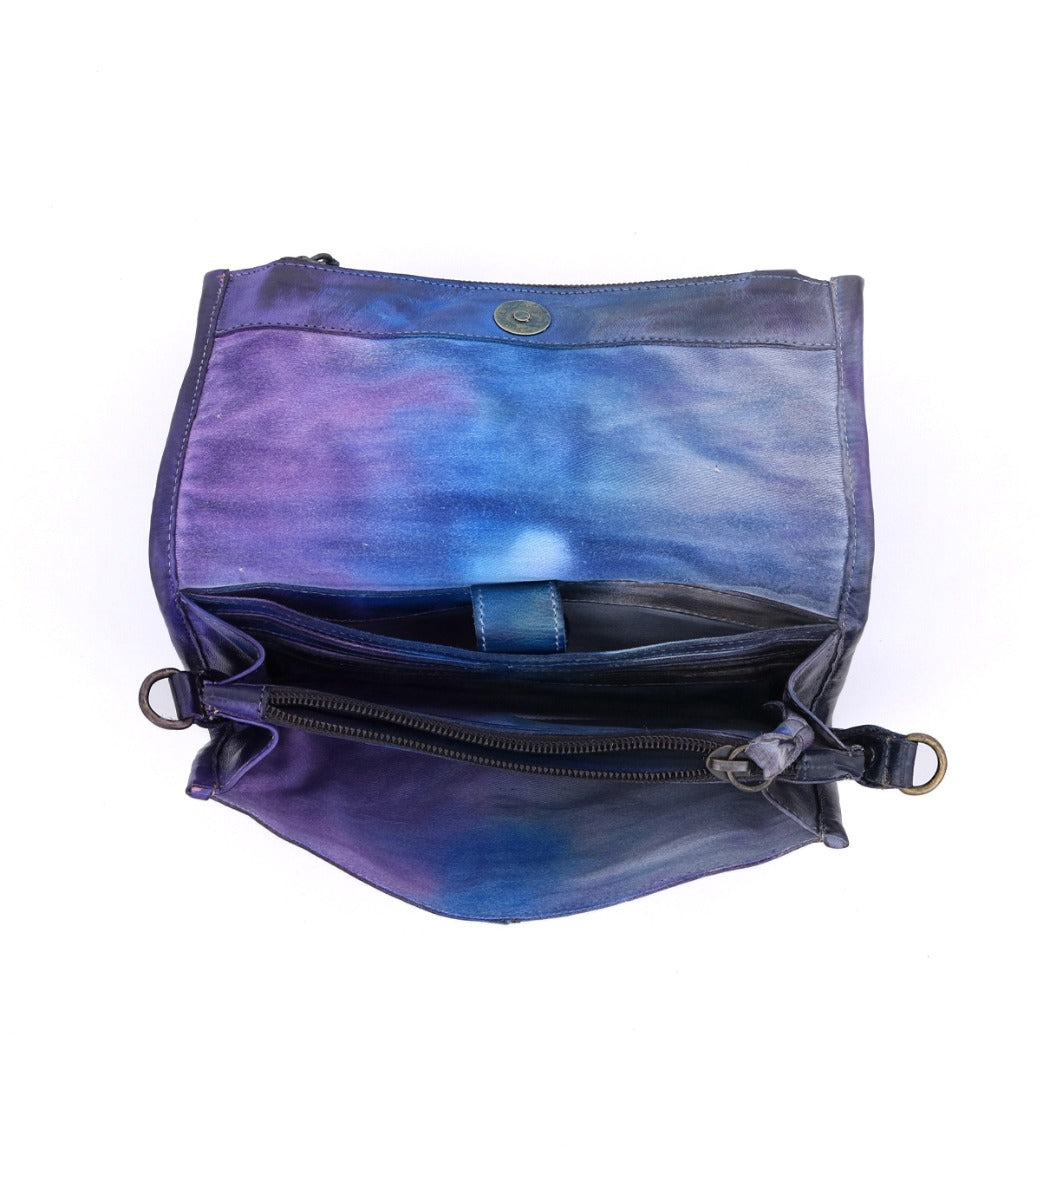 An Amina purse with a zipper, in blue and purple, made by Bed Stu.